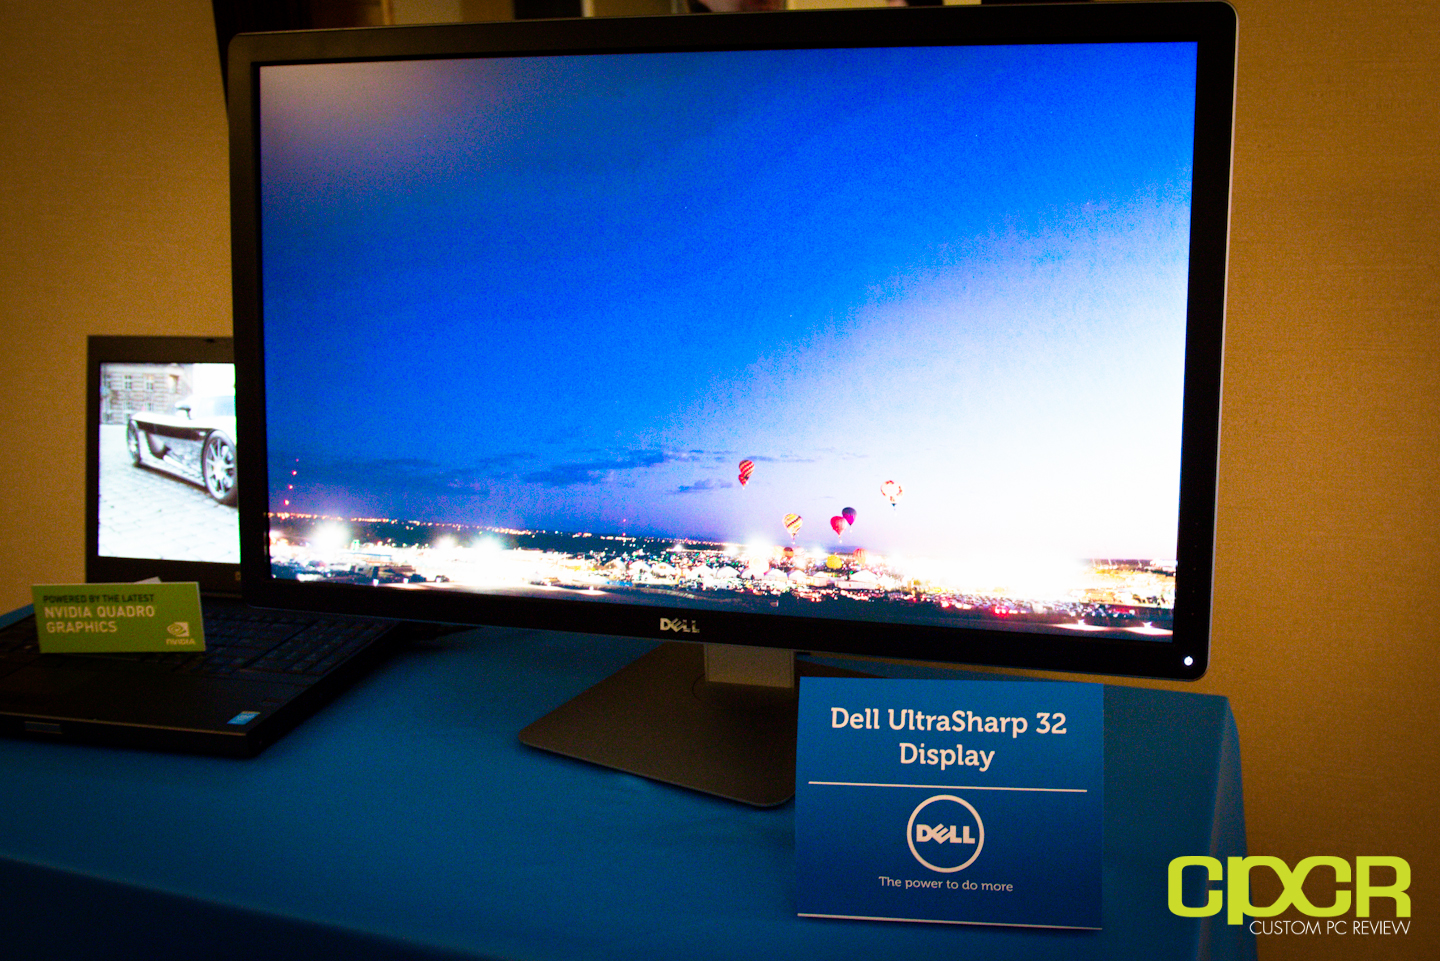 SIGGRAPH 2013: Dell Unveils 32″ Ultrasharp with 3840×2160 Native Resolution